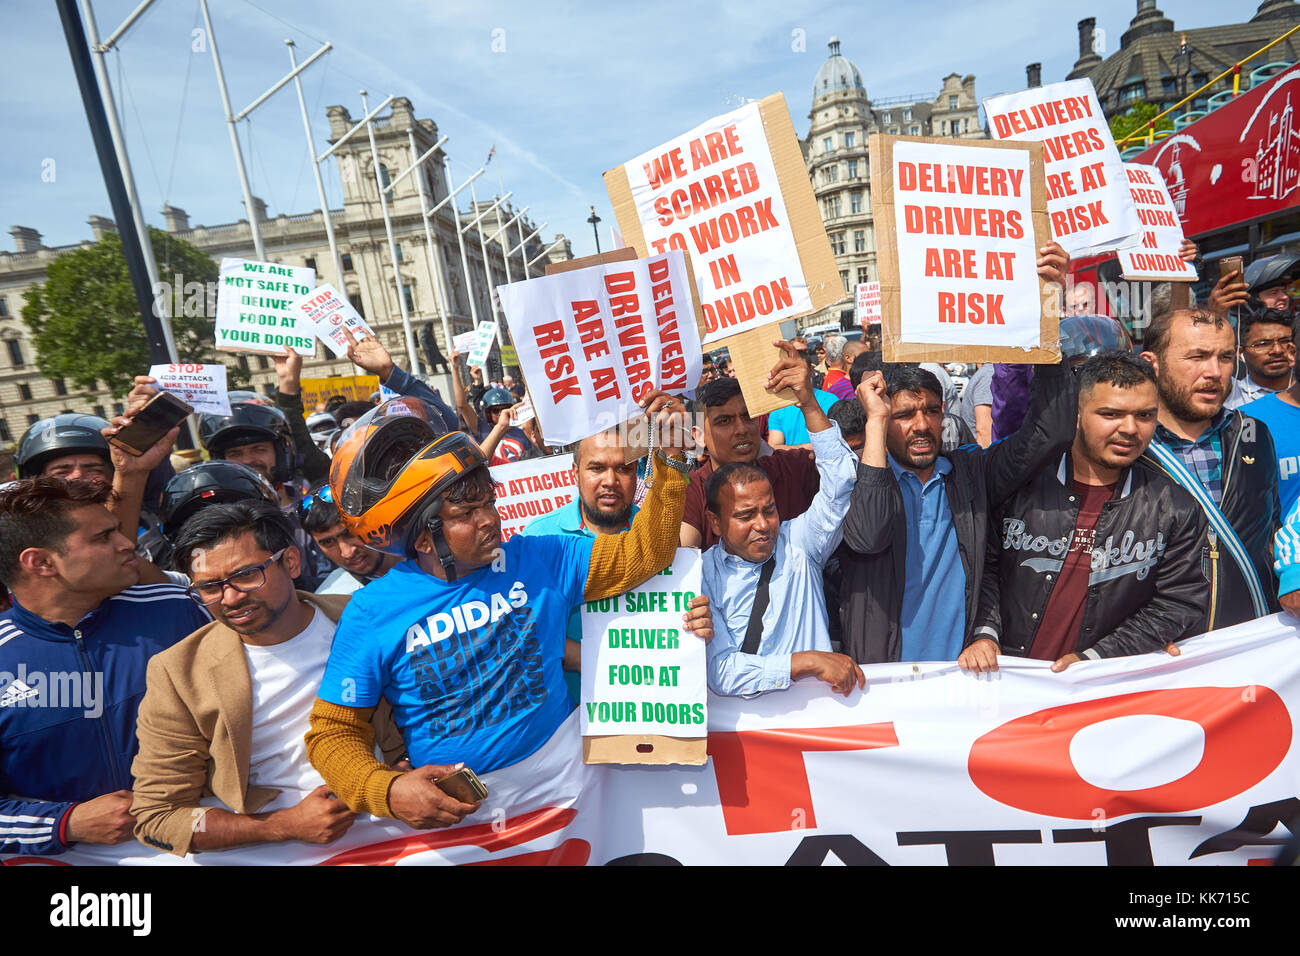 Moped riders, including couriers and delivery drivers, protest in Parliament Square in London against a recent spate of acid attacks Stock Photo